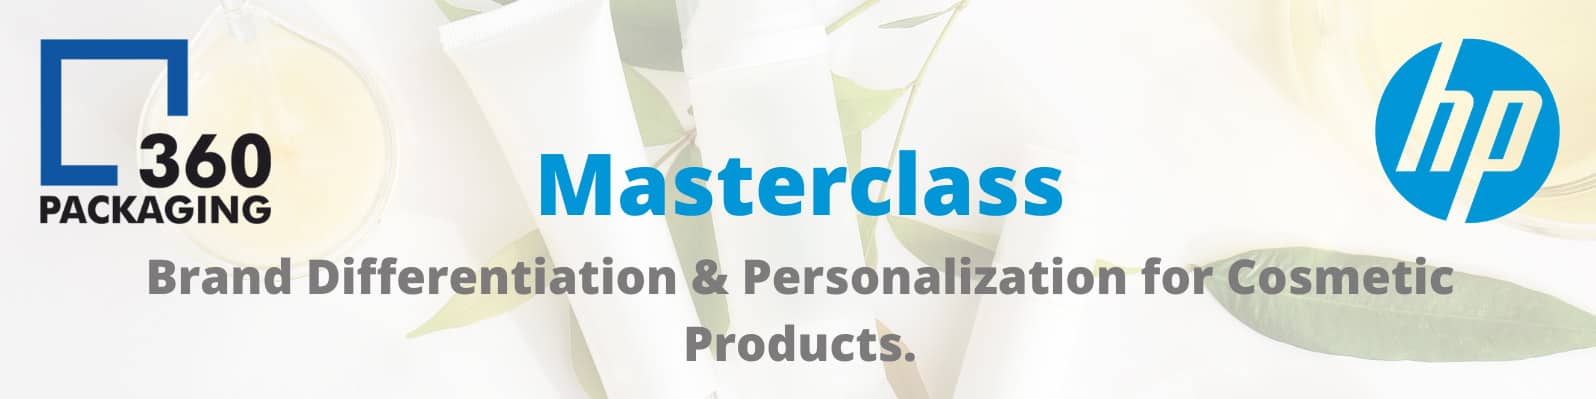 P360 Masterclass - Brand Differentiation & Personalization for Cosmetic Products